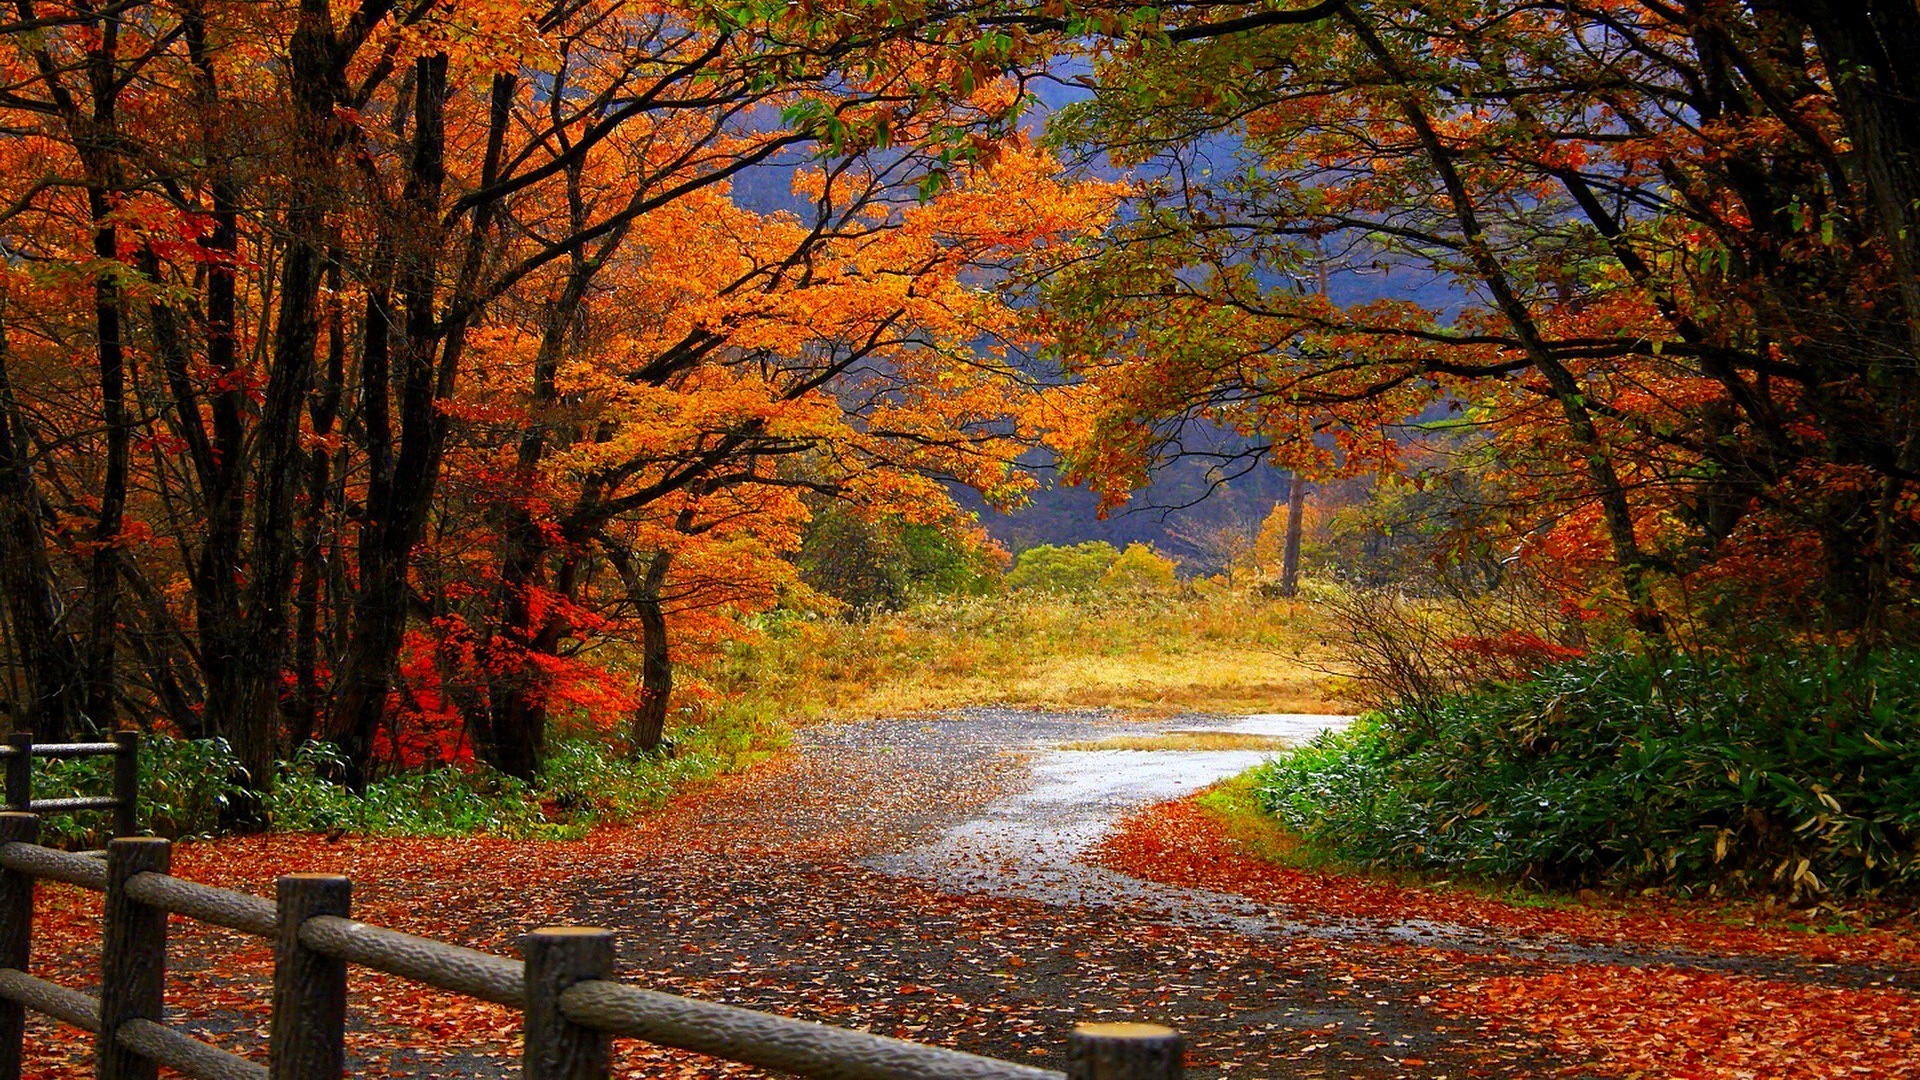 Autumn full hd hdtv fhd 1080p wallpapers hd desktop backgrounds  1920x1080 images and pictures